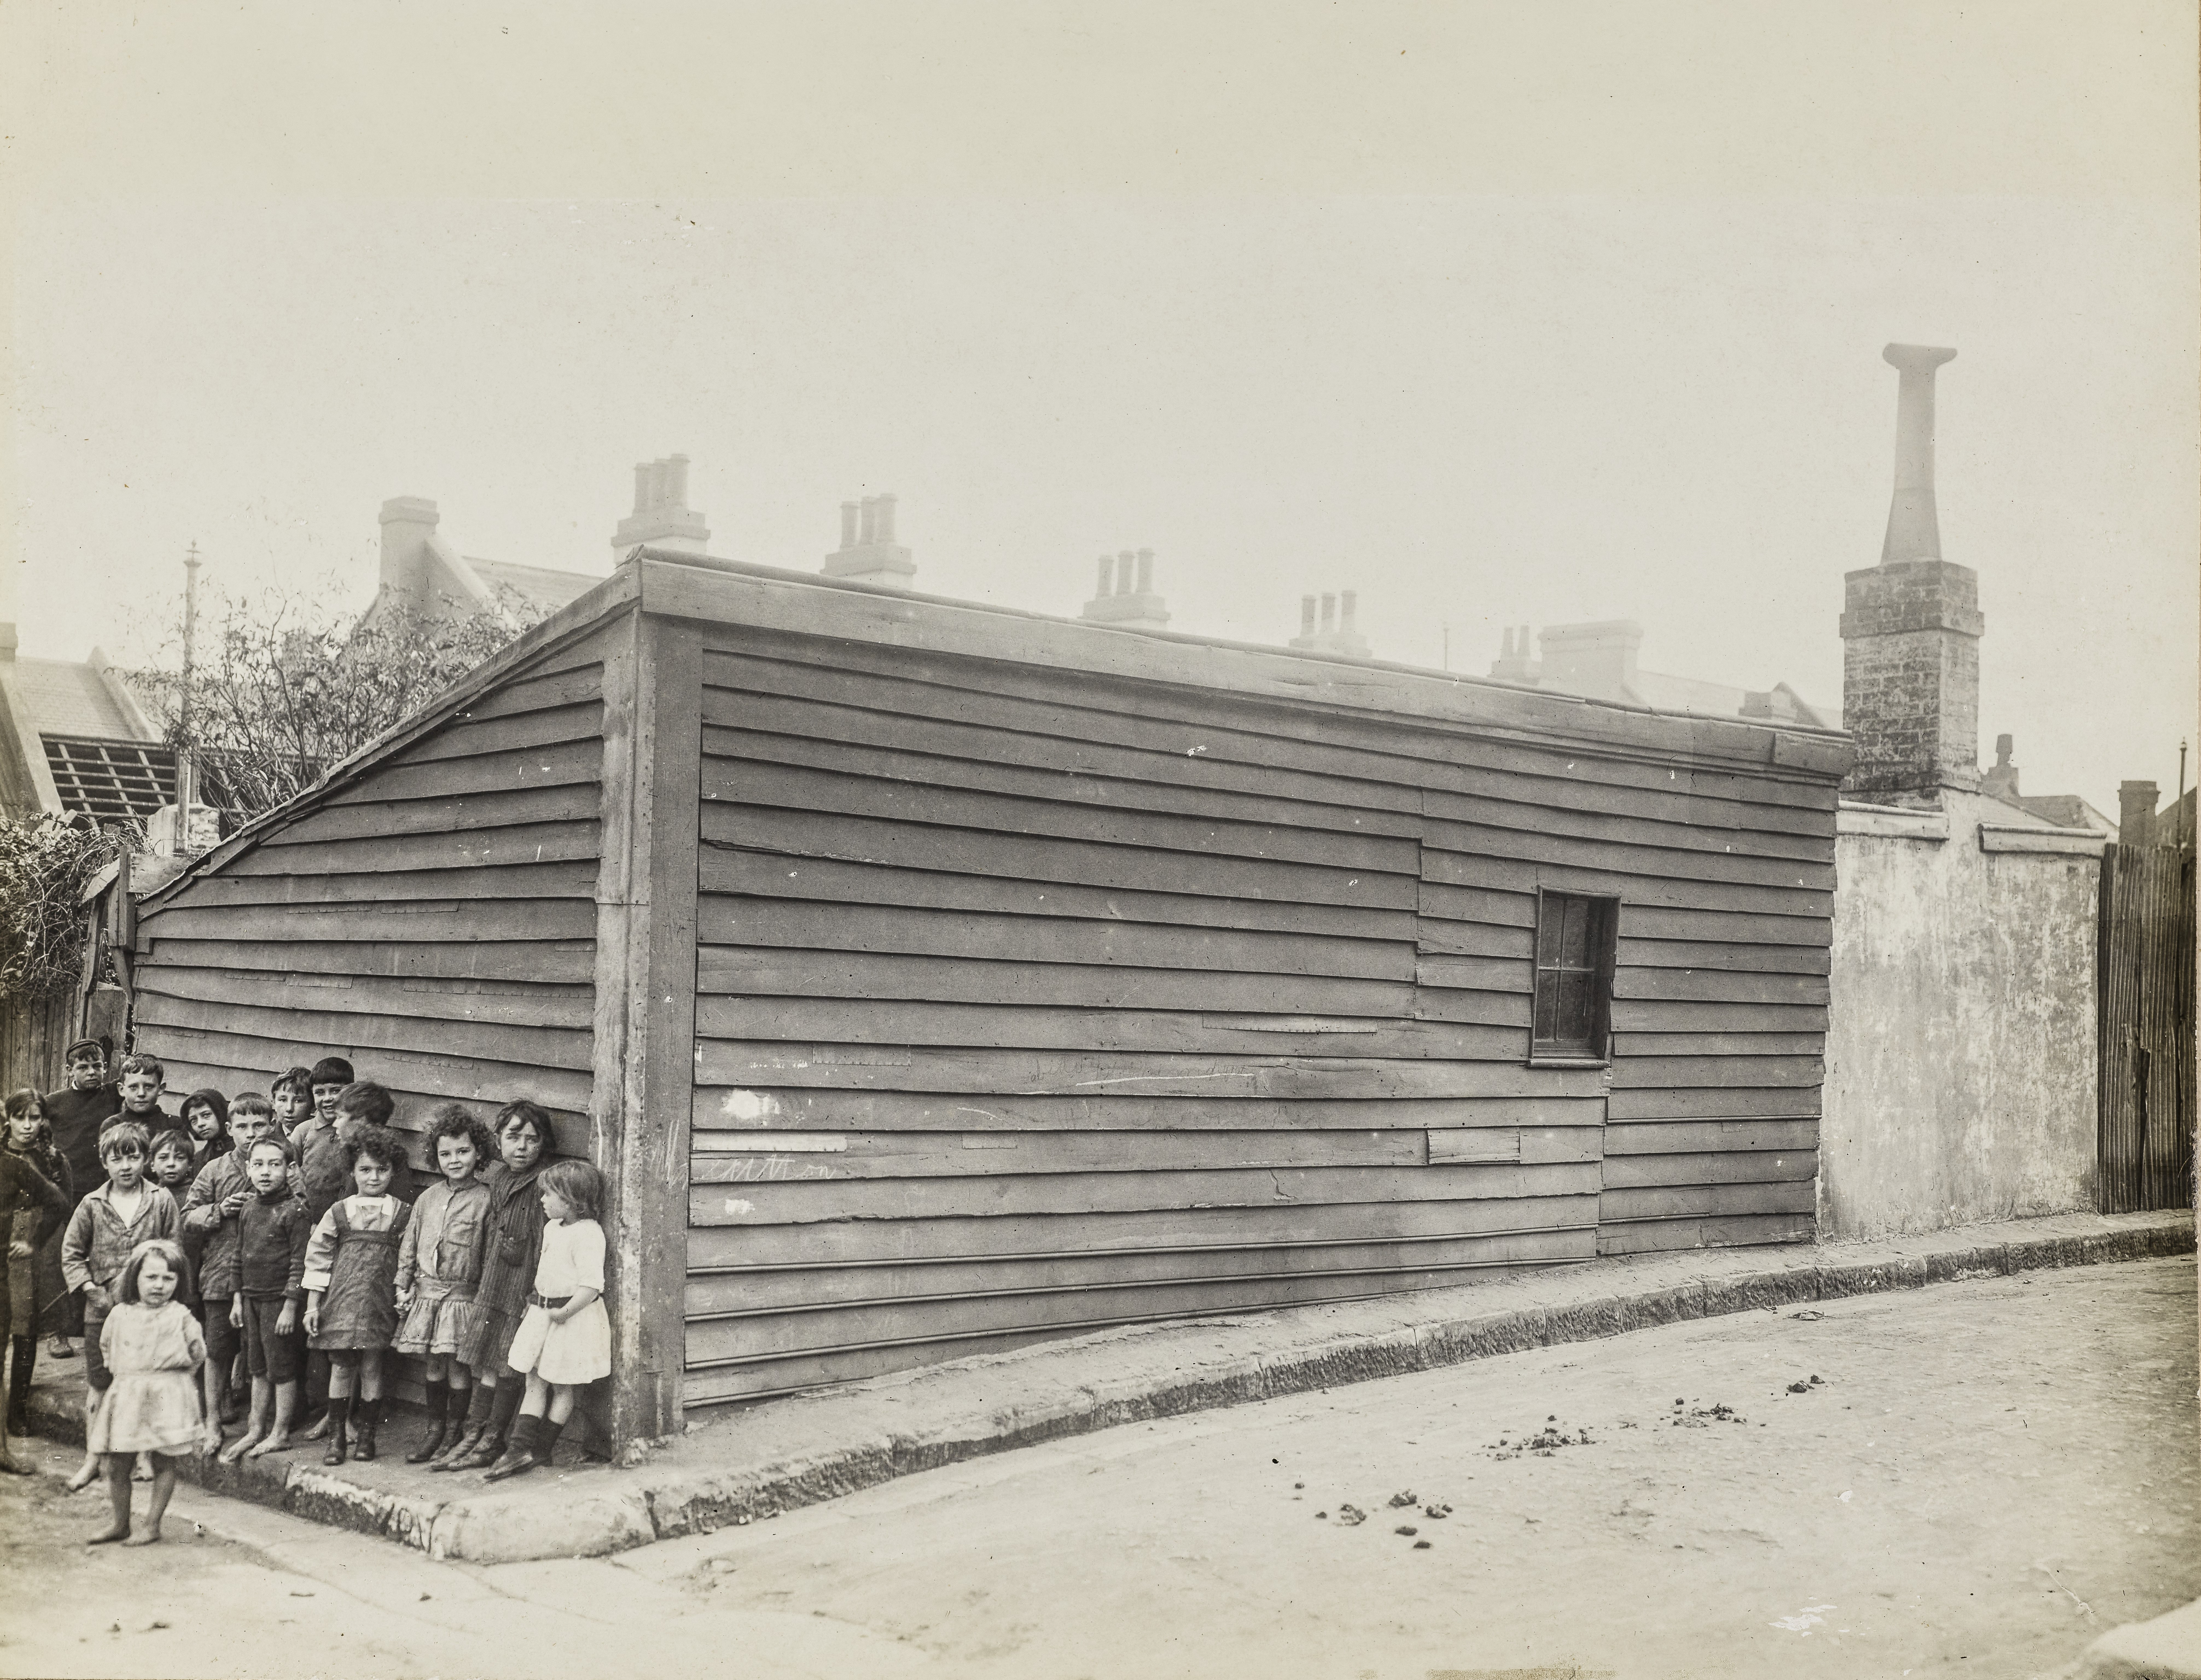 Photograph showing children in front of timber building